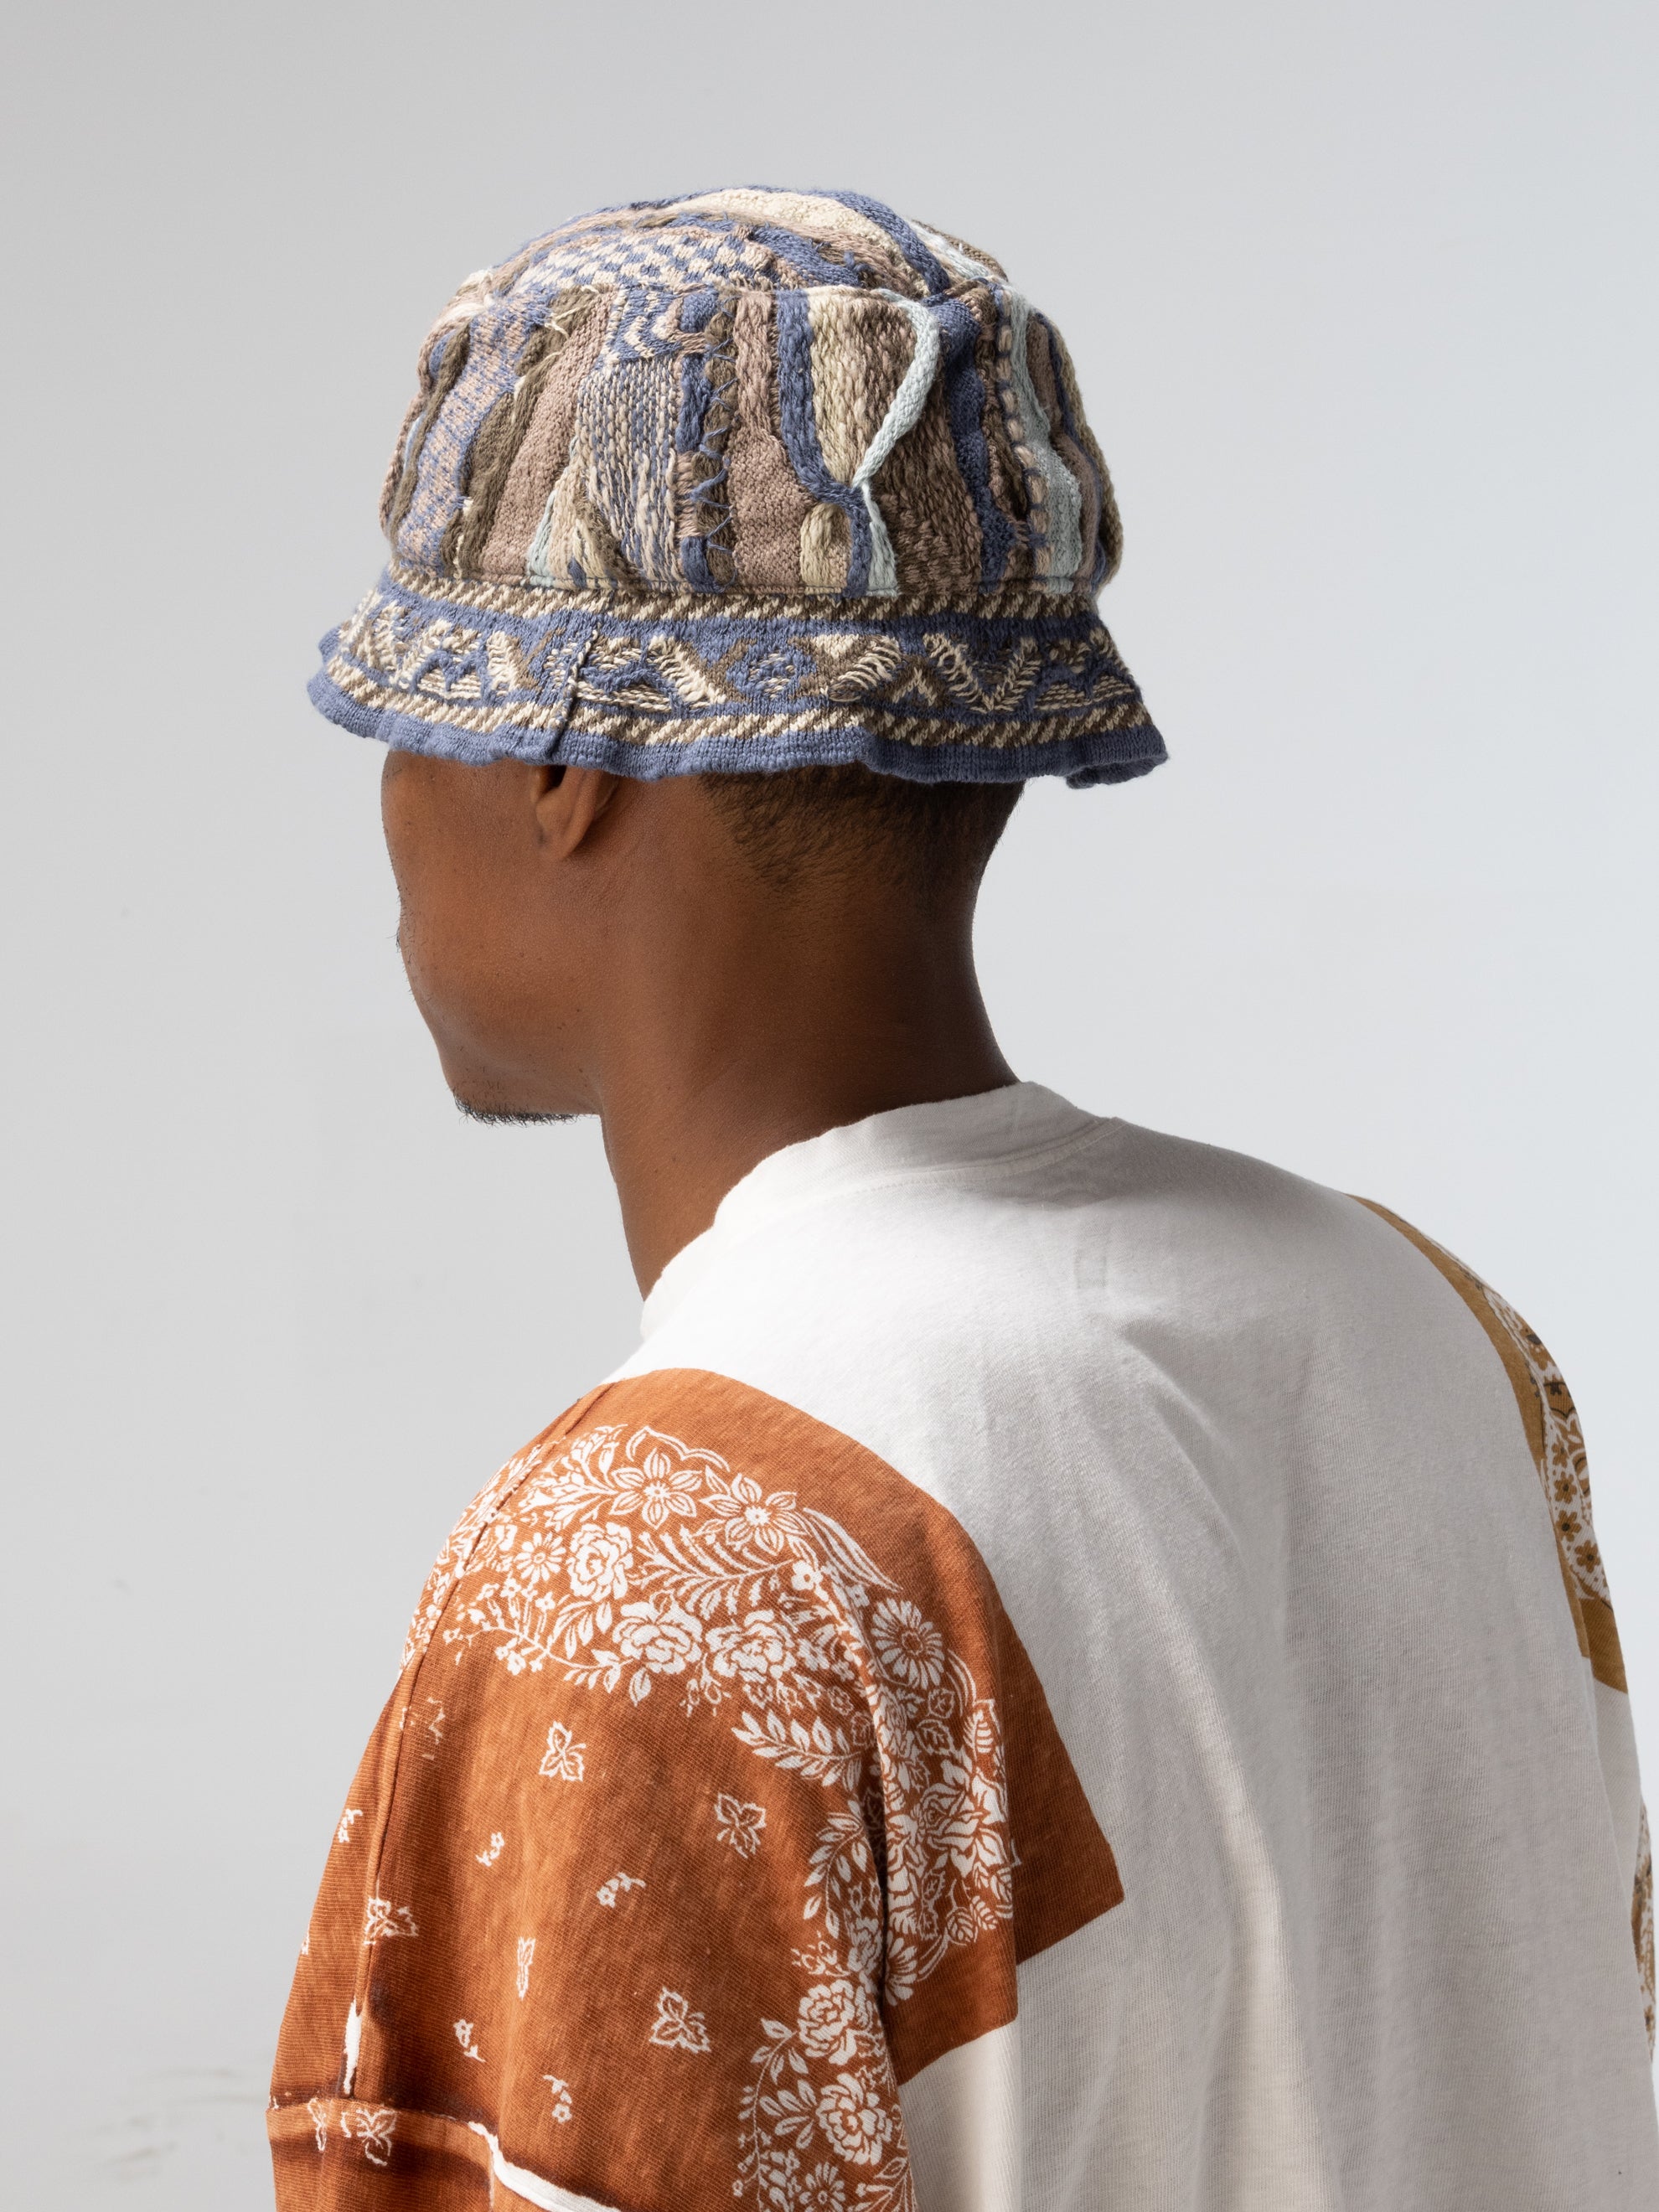 Kapital 7G Knit Gaudy Bucket Hat | camillevieraservices.com